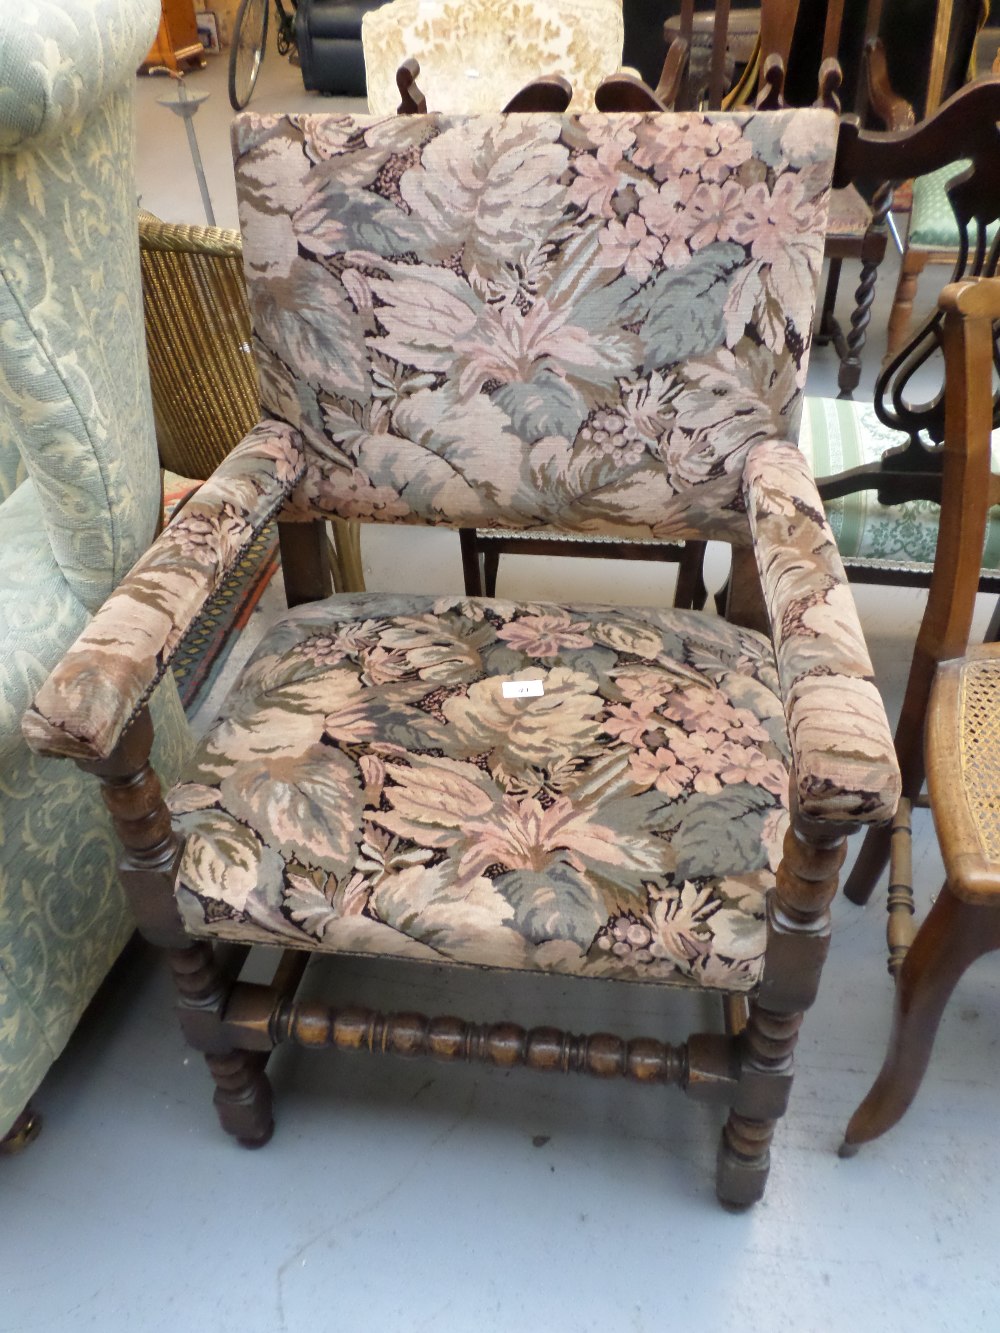 Wooden chair with floral cushion